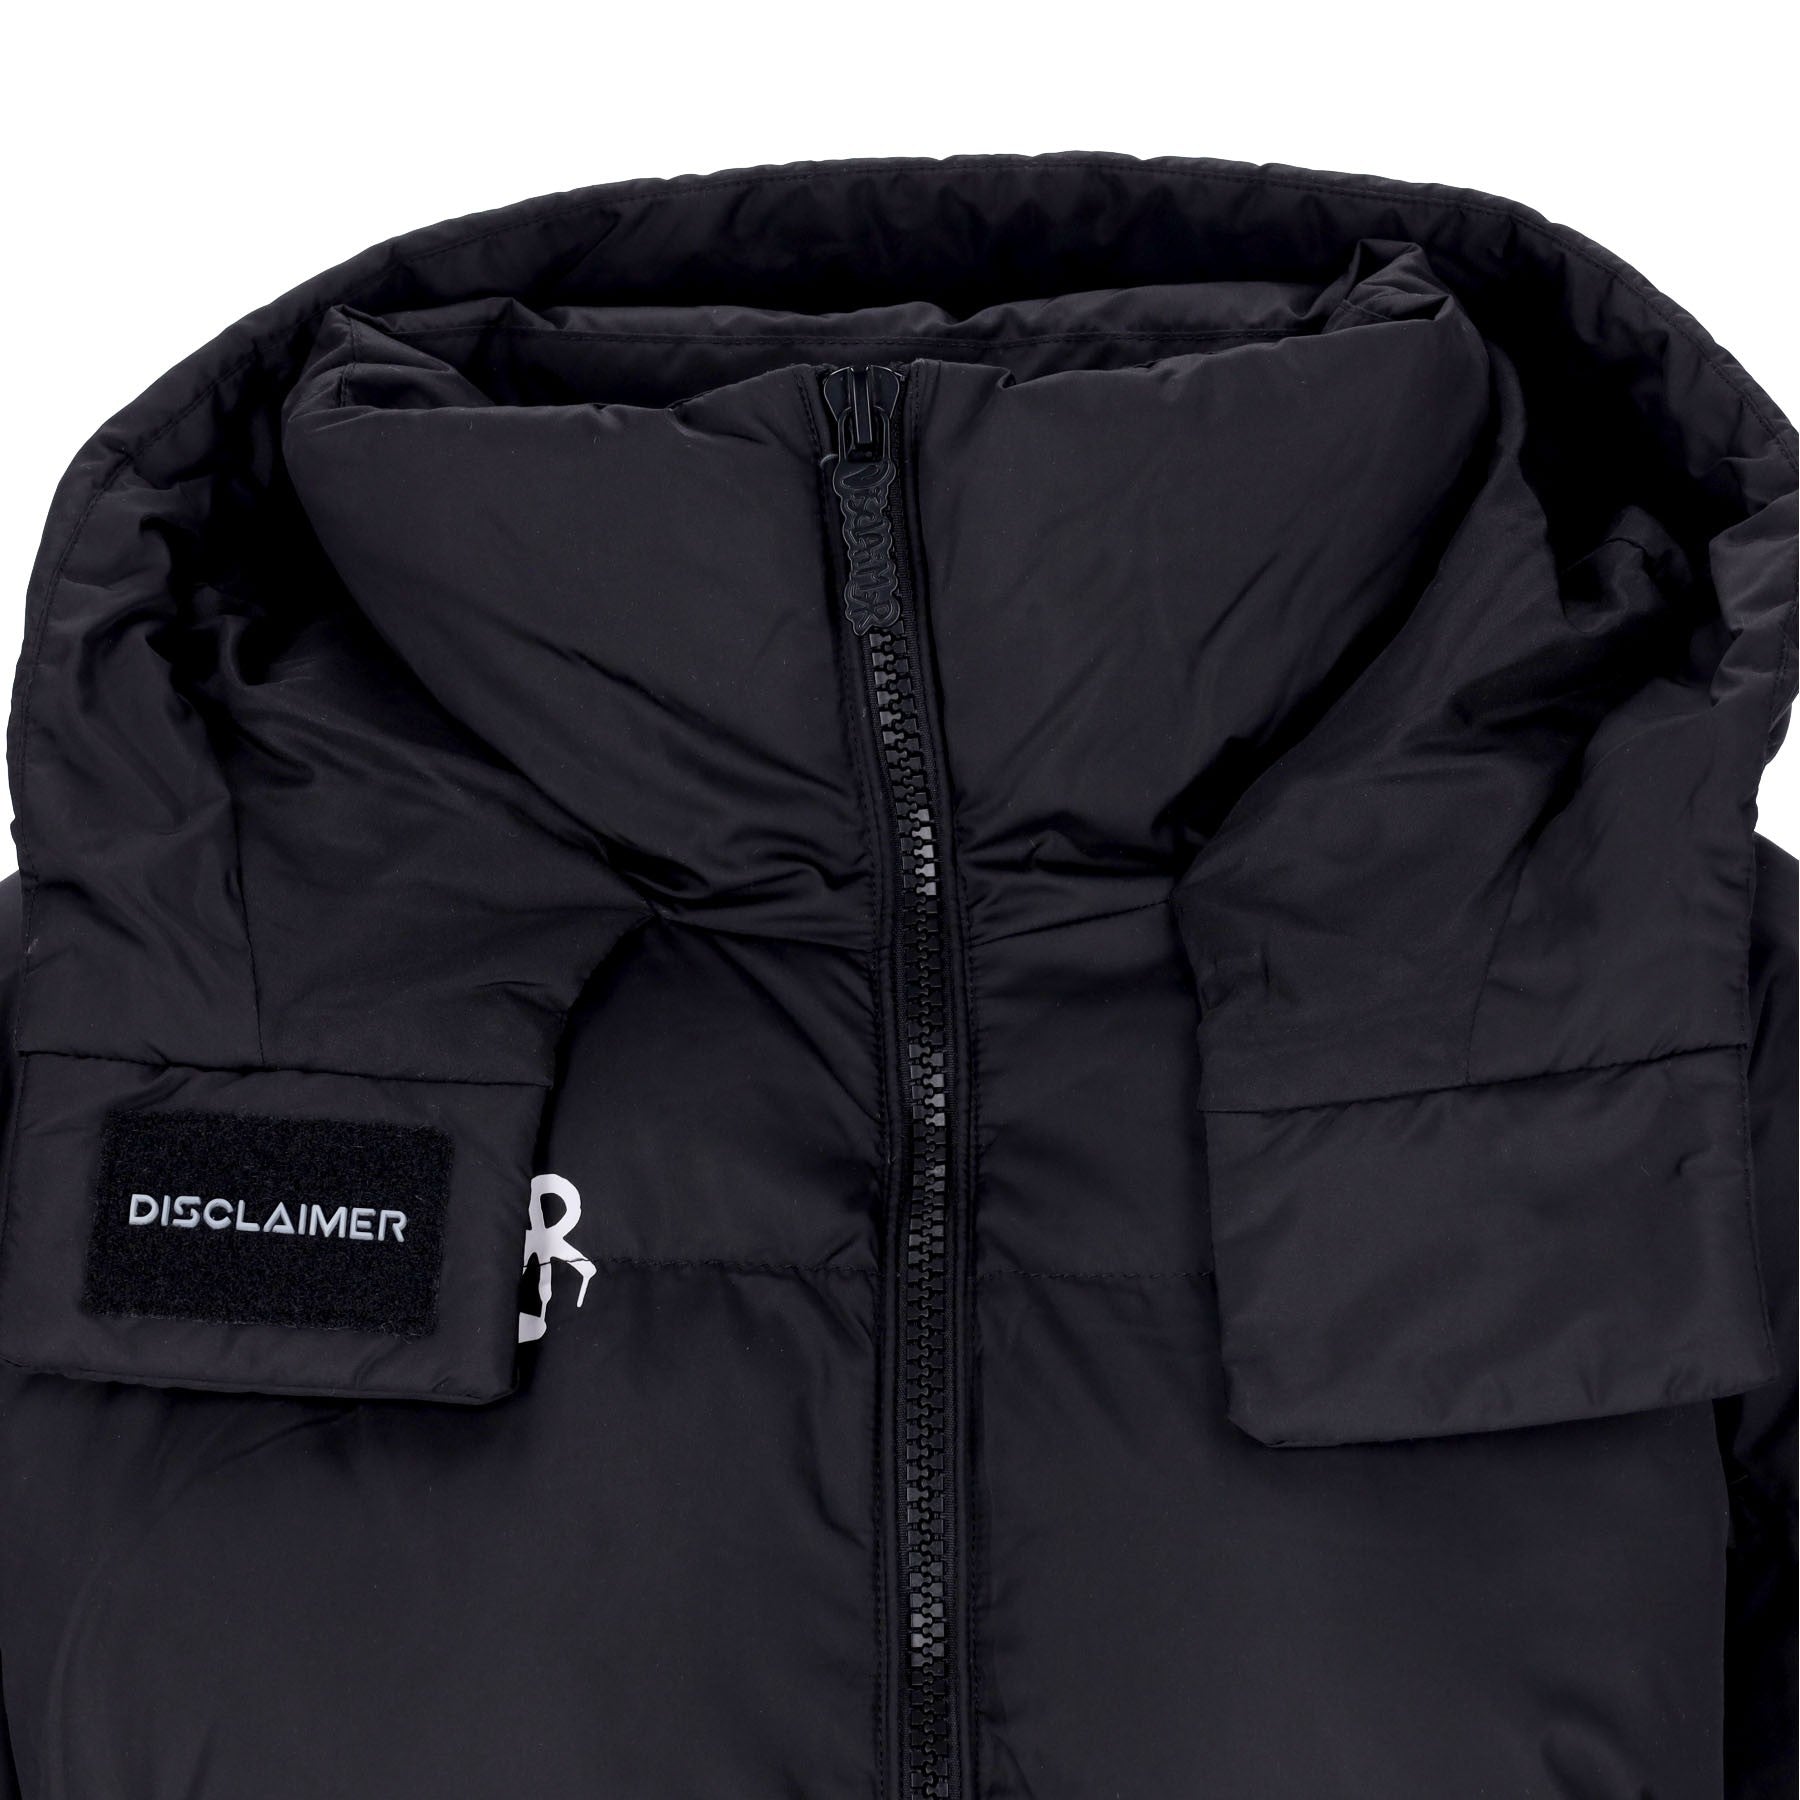 All Right Reserved Women's Padded Jacket Black